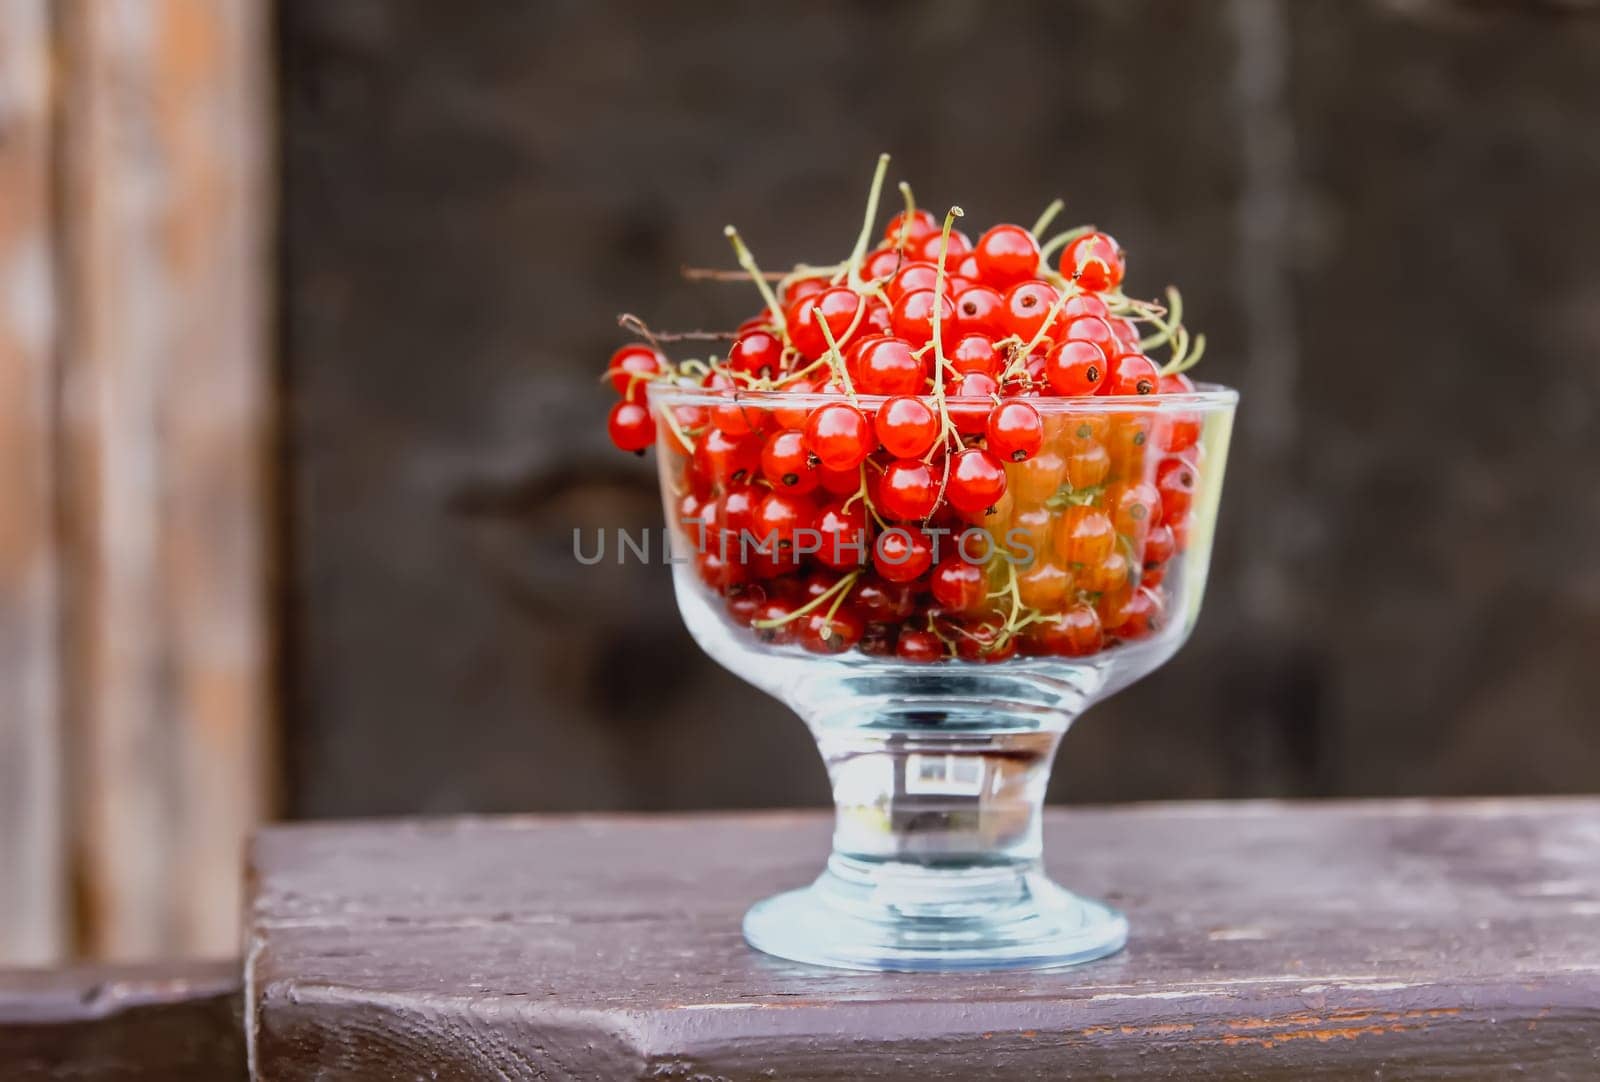 Red currant berries in a small glass cup on wooden wall background.